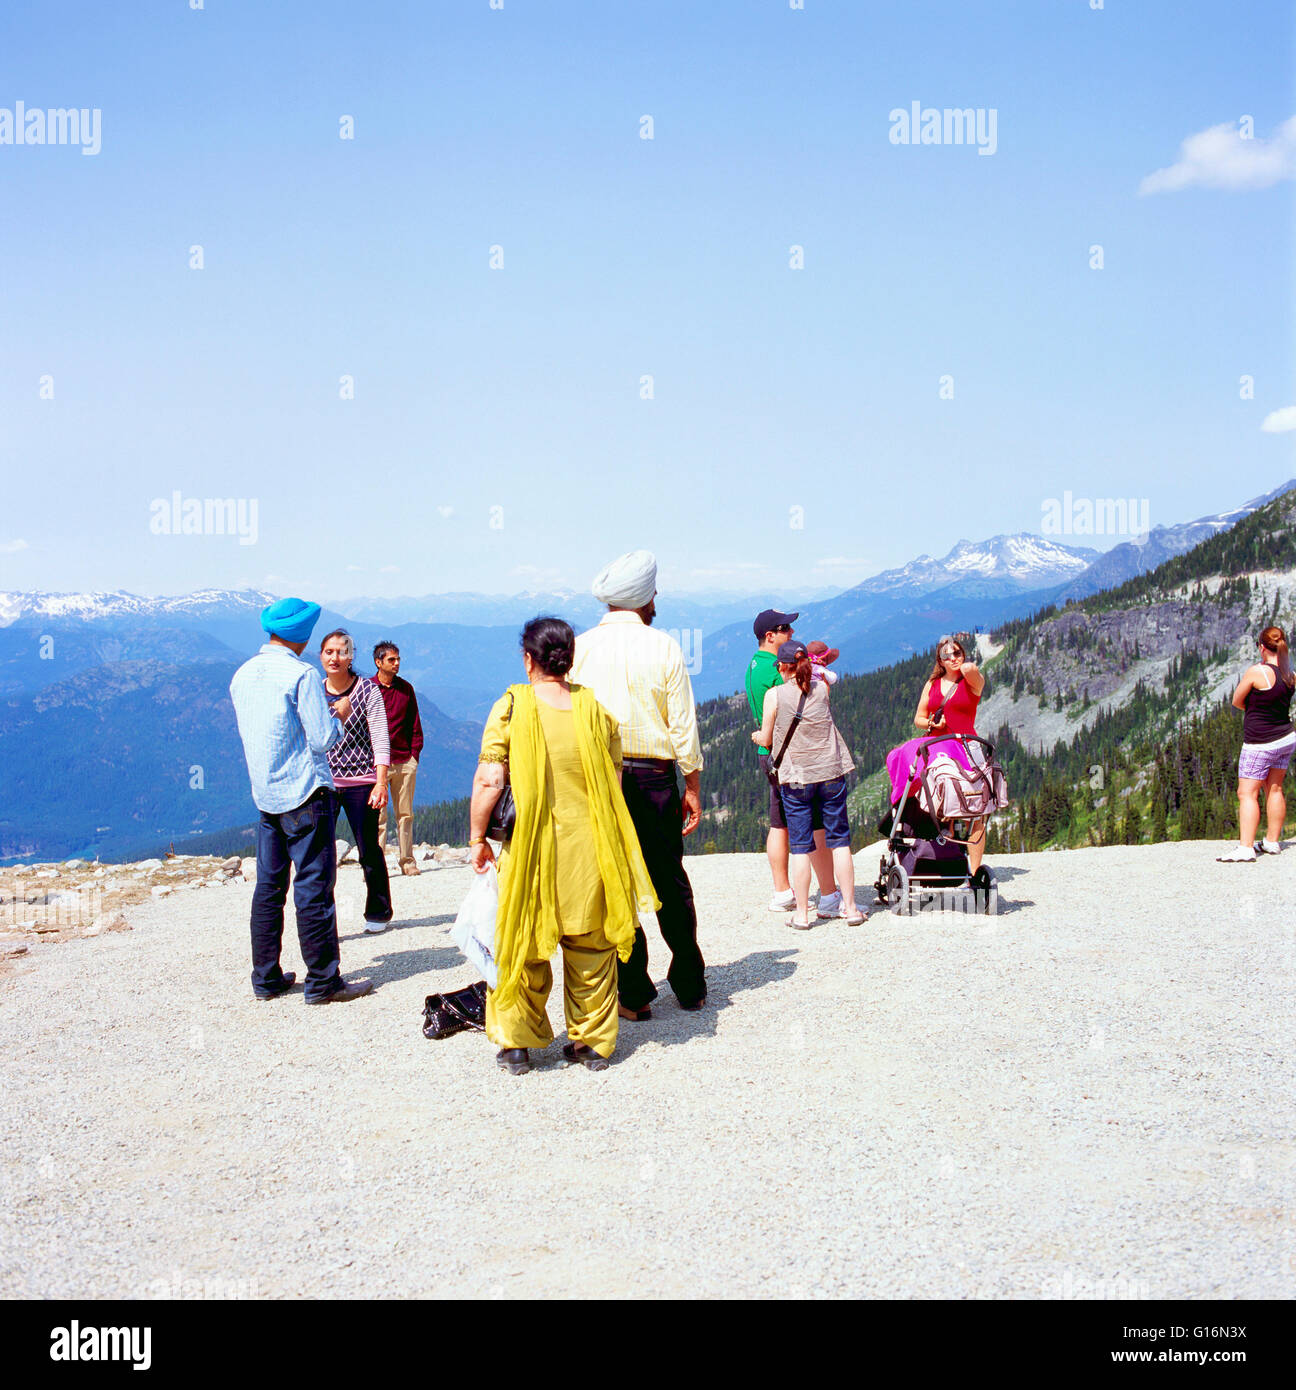 East Indian / South Asian Tourists visiting Lookout at Whistler, BC, British Columbia, Canada, Summer Stock Photo